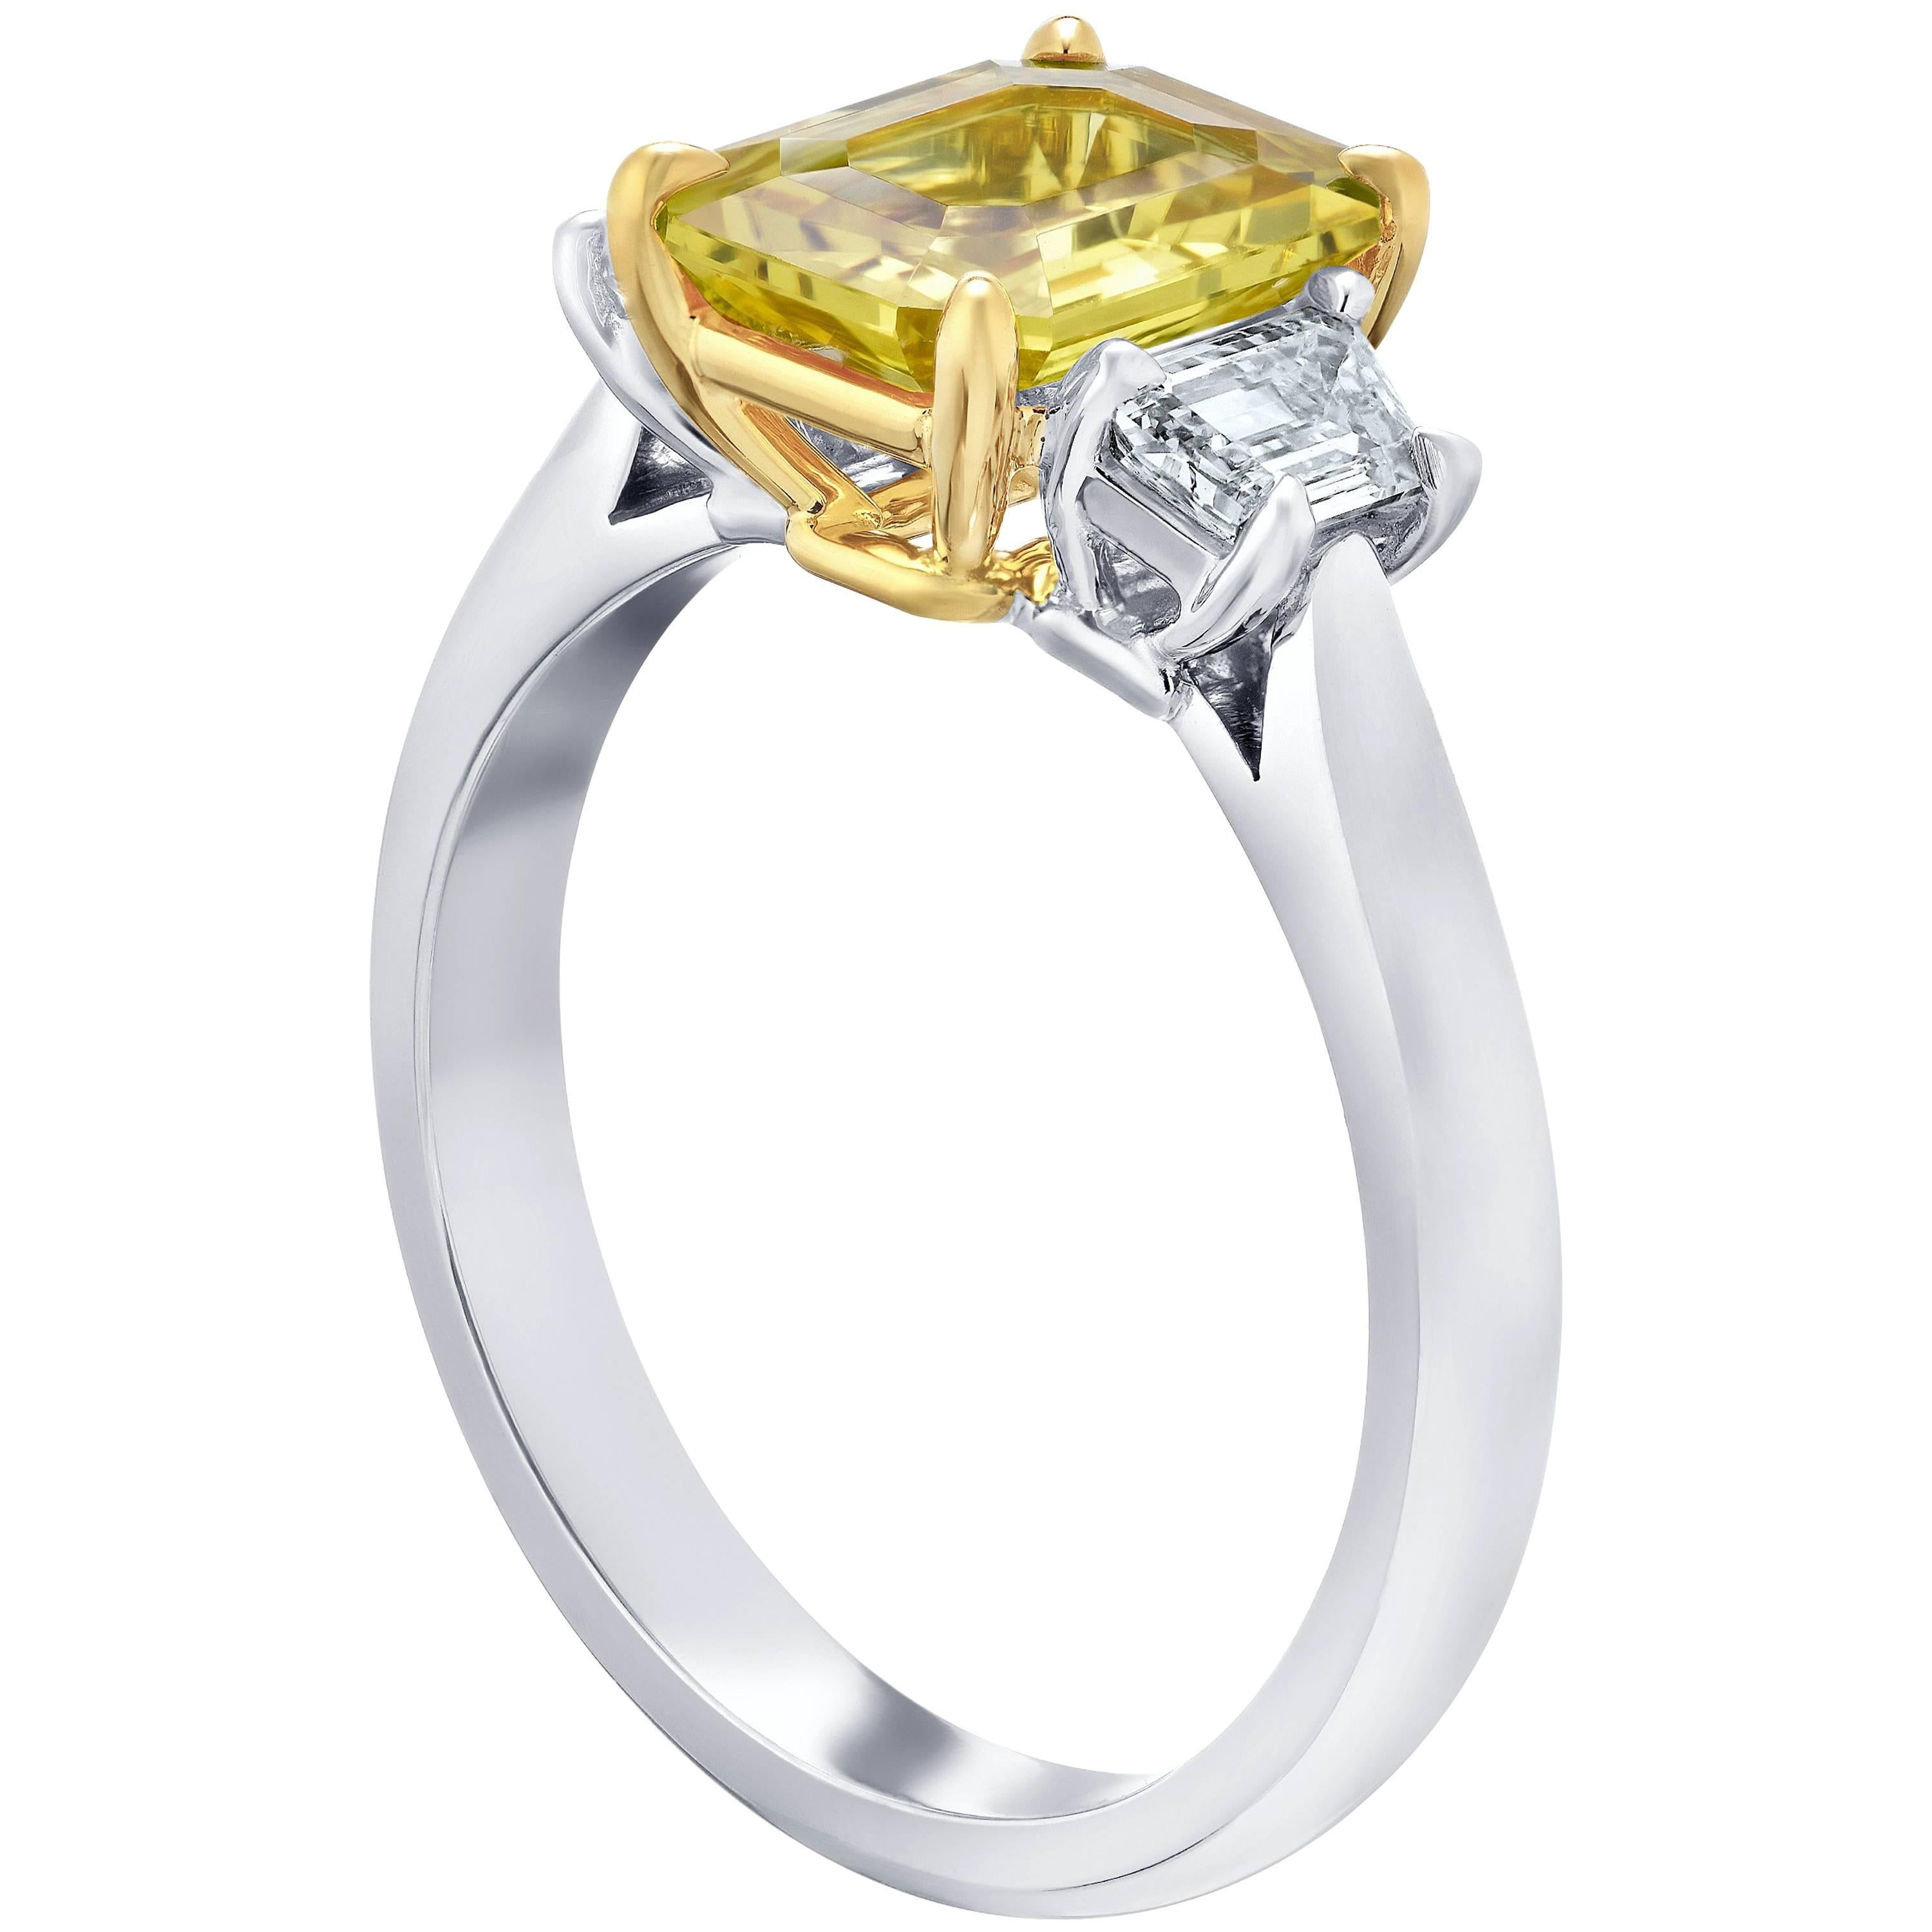 This meticulously crafted ring has a center Emerald Cut Yellow Sapphire weighing 2.50 carats with two trappazoid diamonds (F+ VS1+) weighing  .58 carats. All set in platinum and 18k yellow gold basket.
The center stone is total clean and has a great